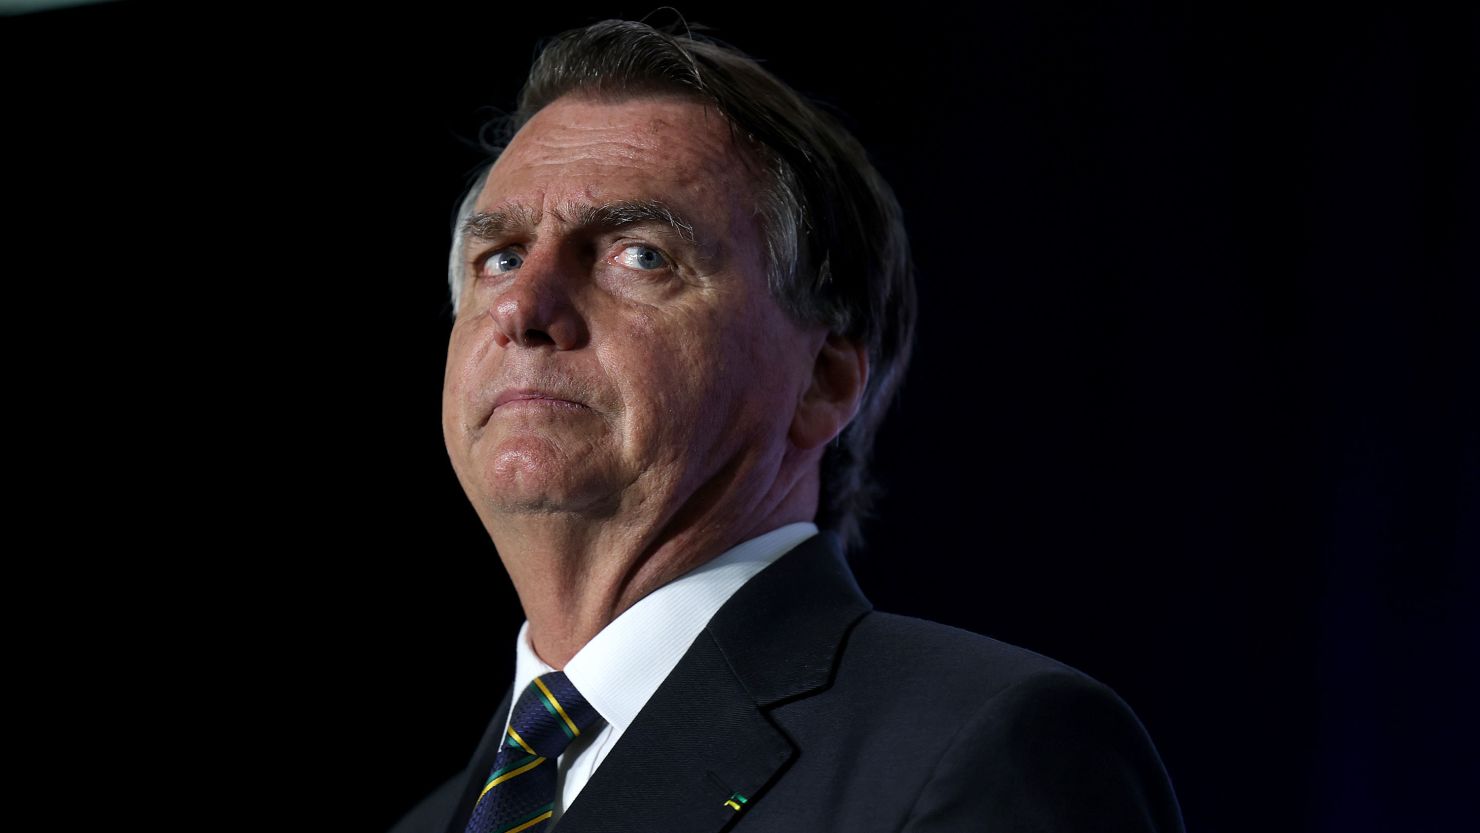 Far-right former Brazilian President Jair Bolsonaro speaks during the Turning Point USA event at the Trump National Doral Miami resort on February 3, 2023, in Florida.